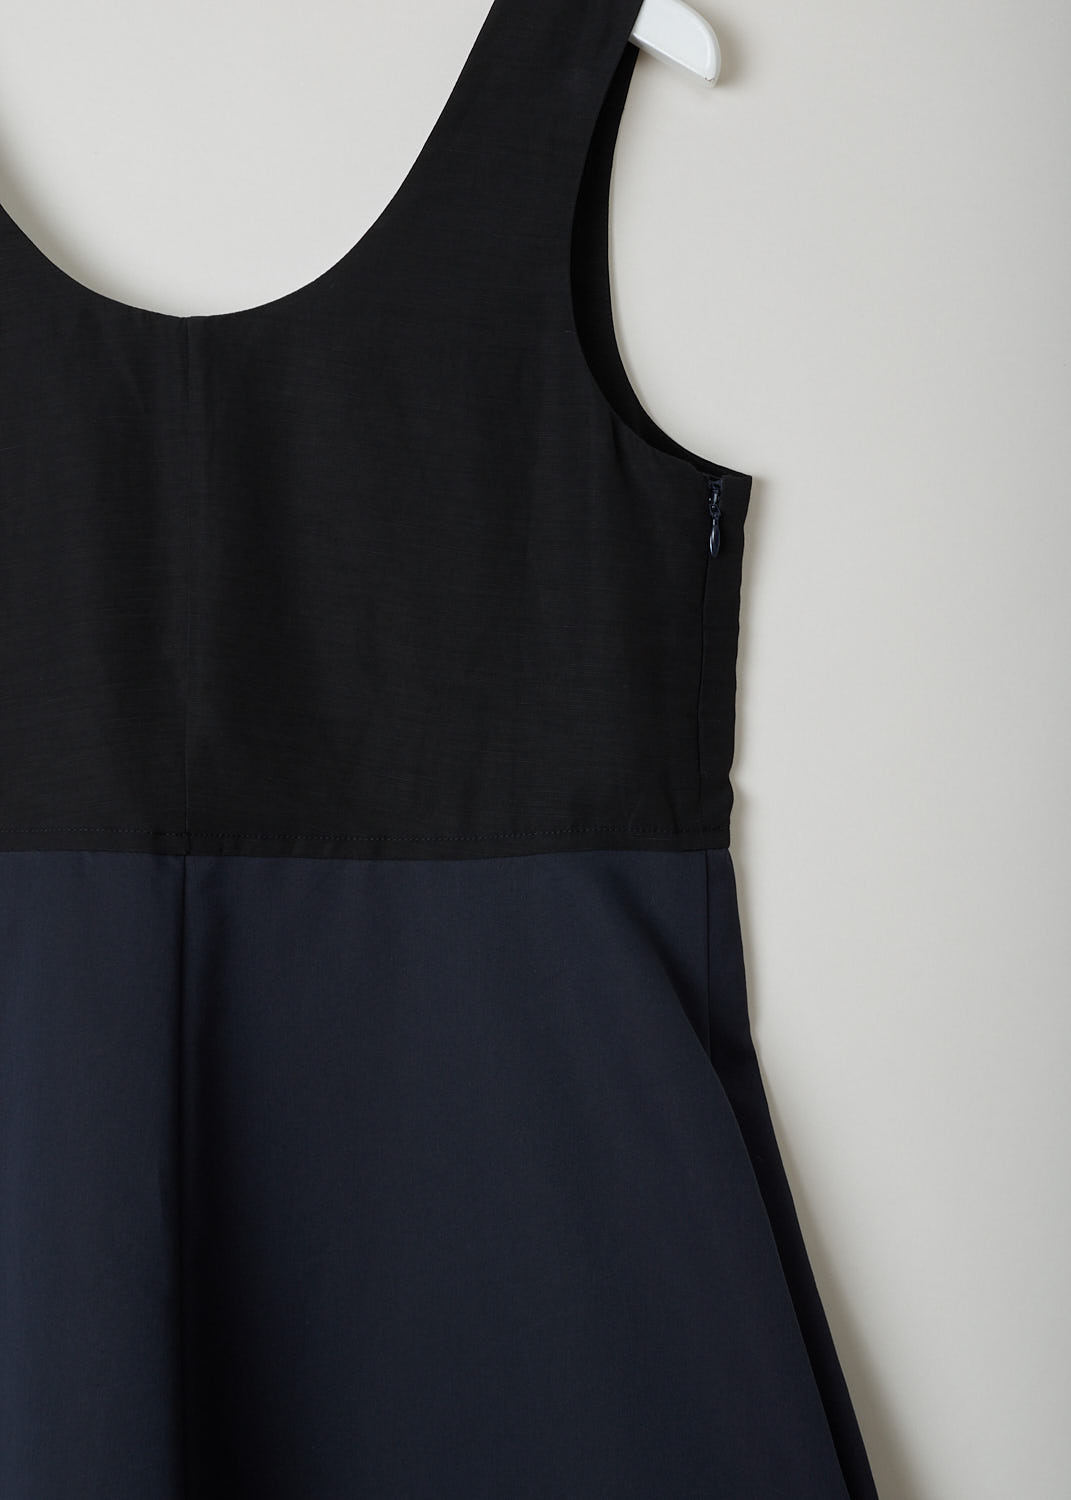 JIL SANDER, TWO-TONE SHIFT DRESS, JSWO507756_WO251400C_402, Black, Blue, Detail, This two-tone sleeveless dress has an empire style silhouette with a black bodice and an elongated dark blue skirt. Slant pockets are concealed in in the side seam. In the back, a centre slit can be found. 
